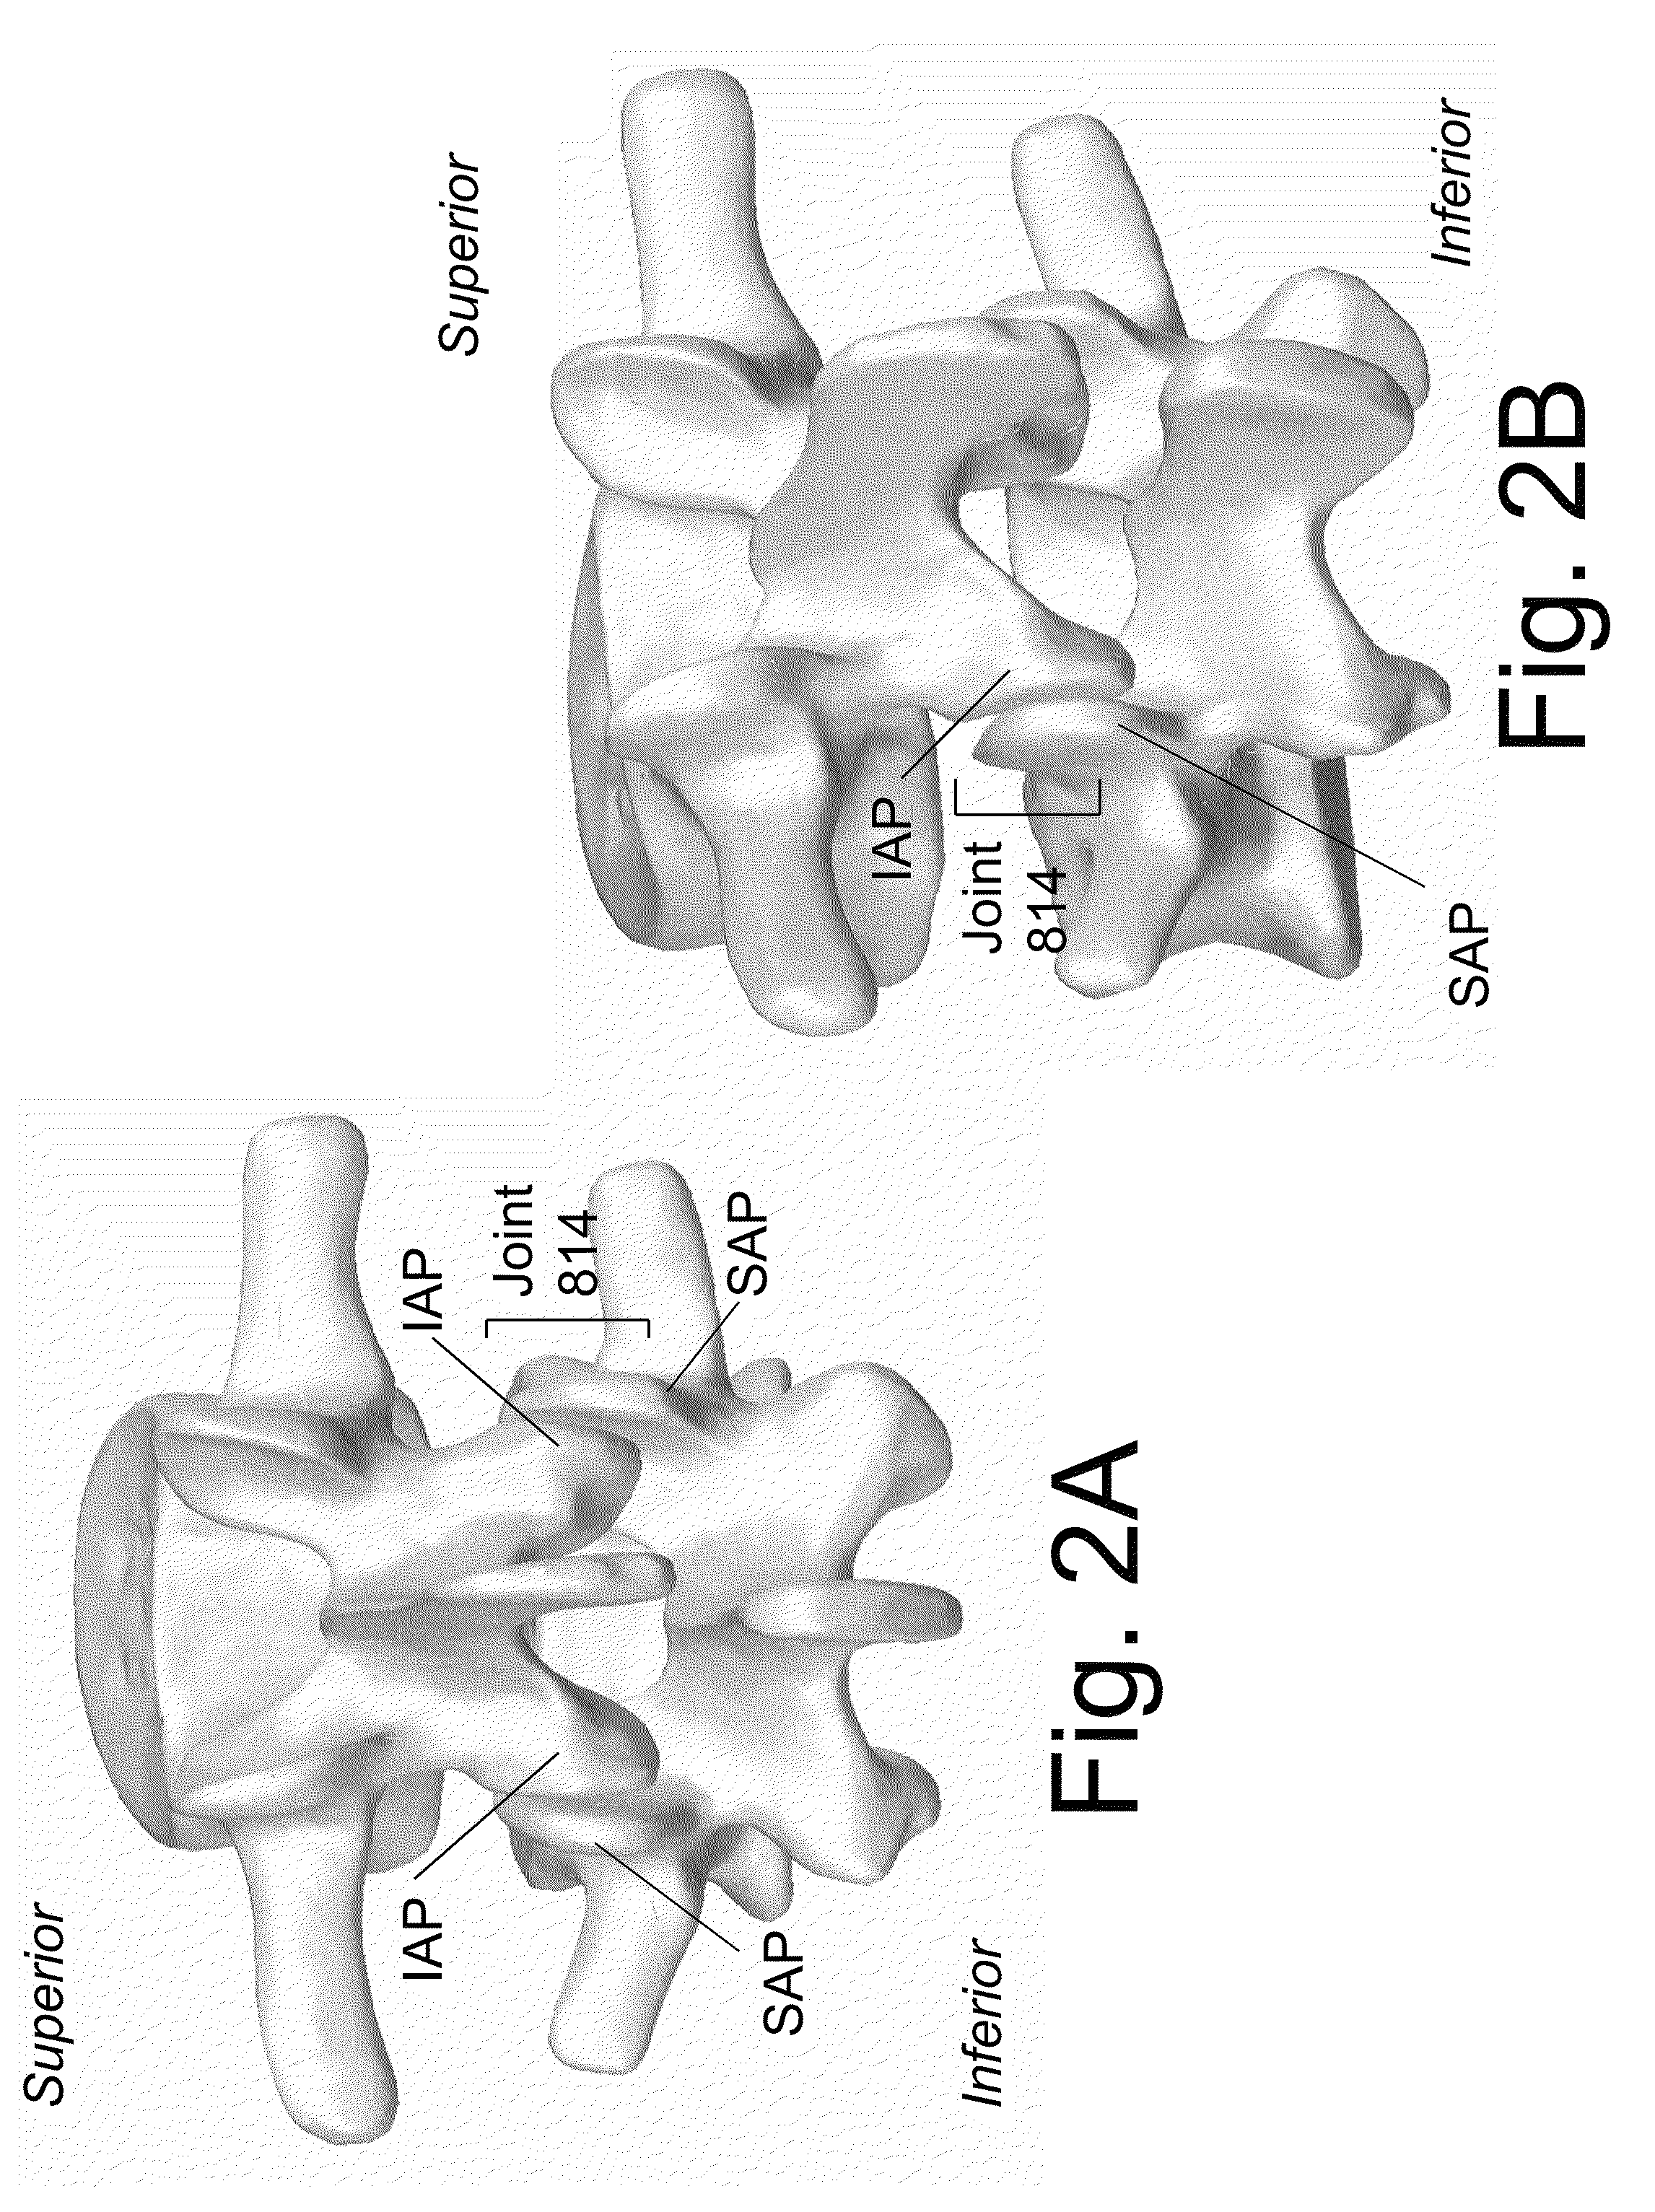 Devices and methods for minimally invasive spinal stablization and instrumentation